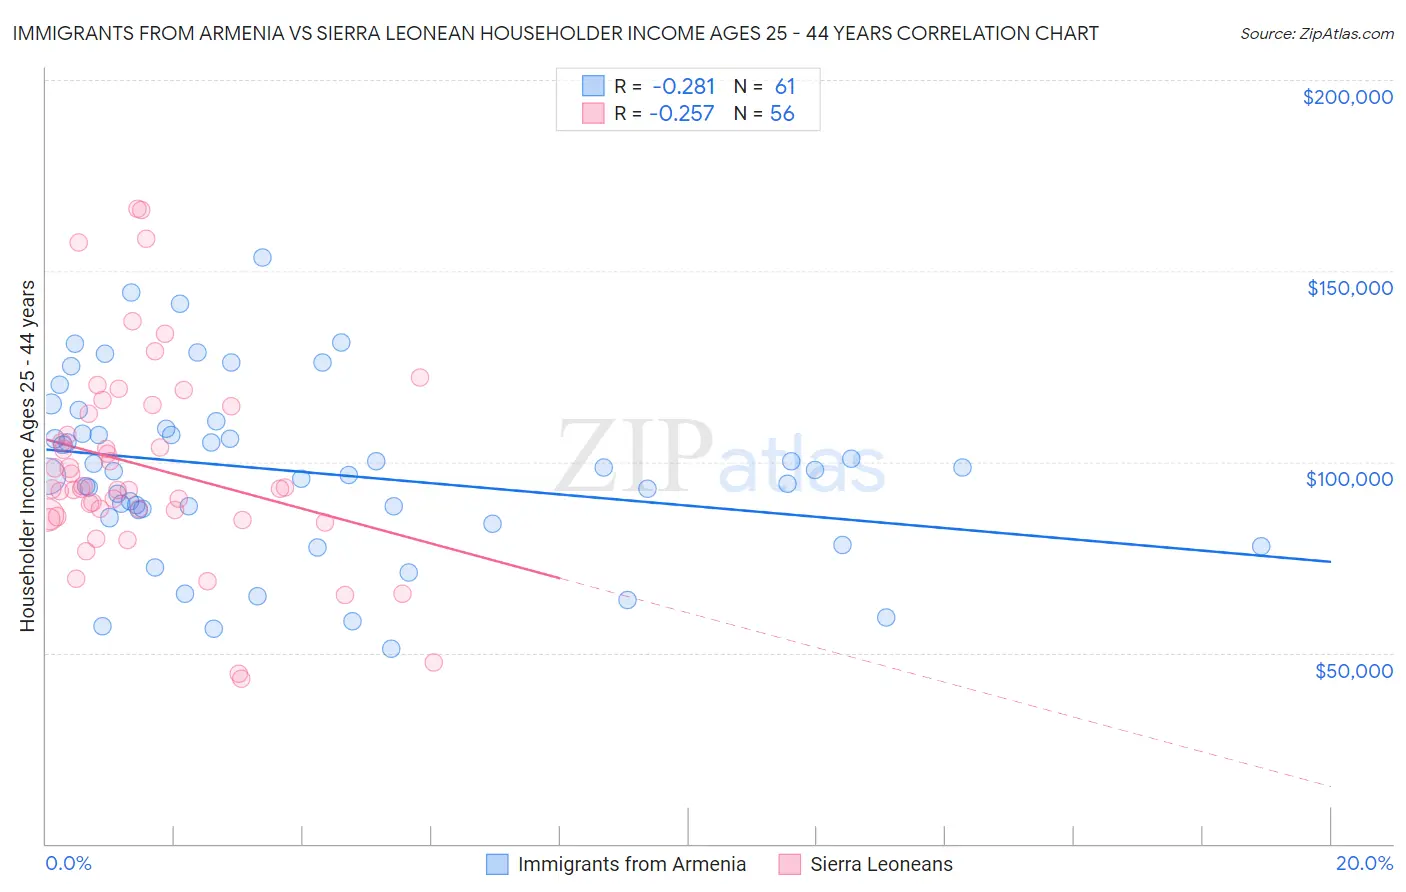 Immigrants from Armenia vs Sierra Leonean Householder Income Ages 25 - 44 years